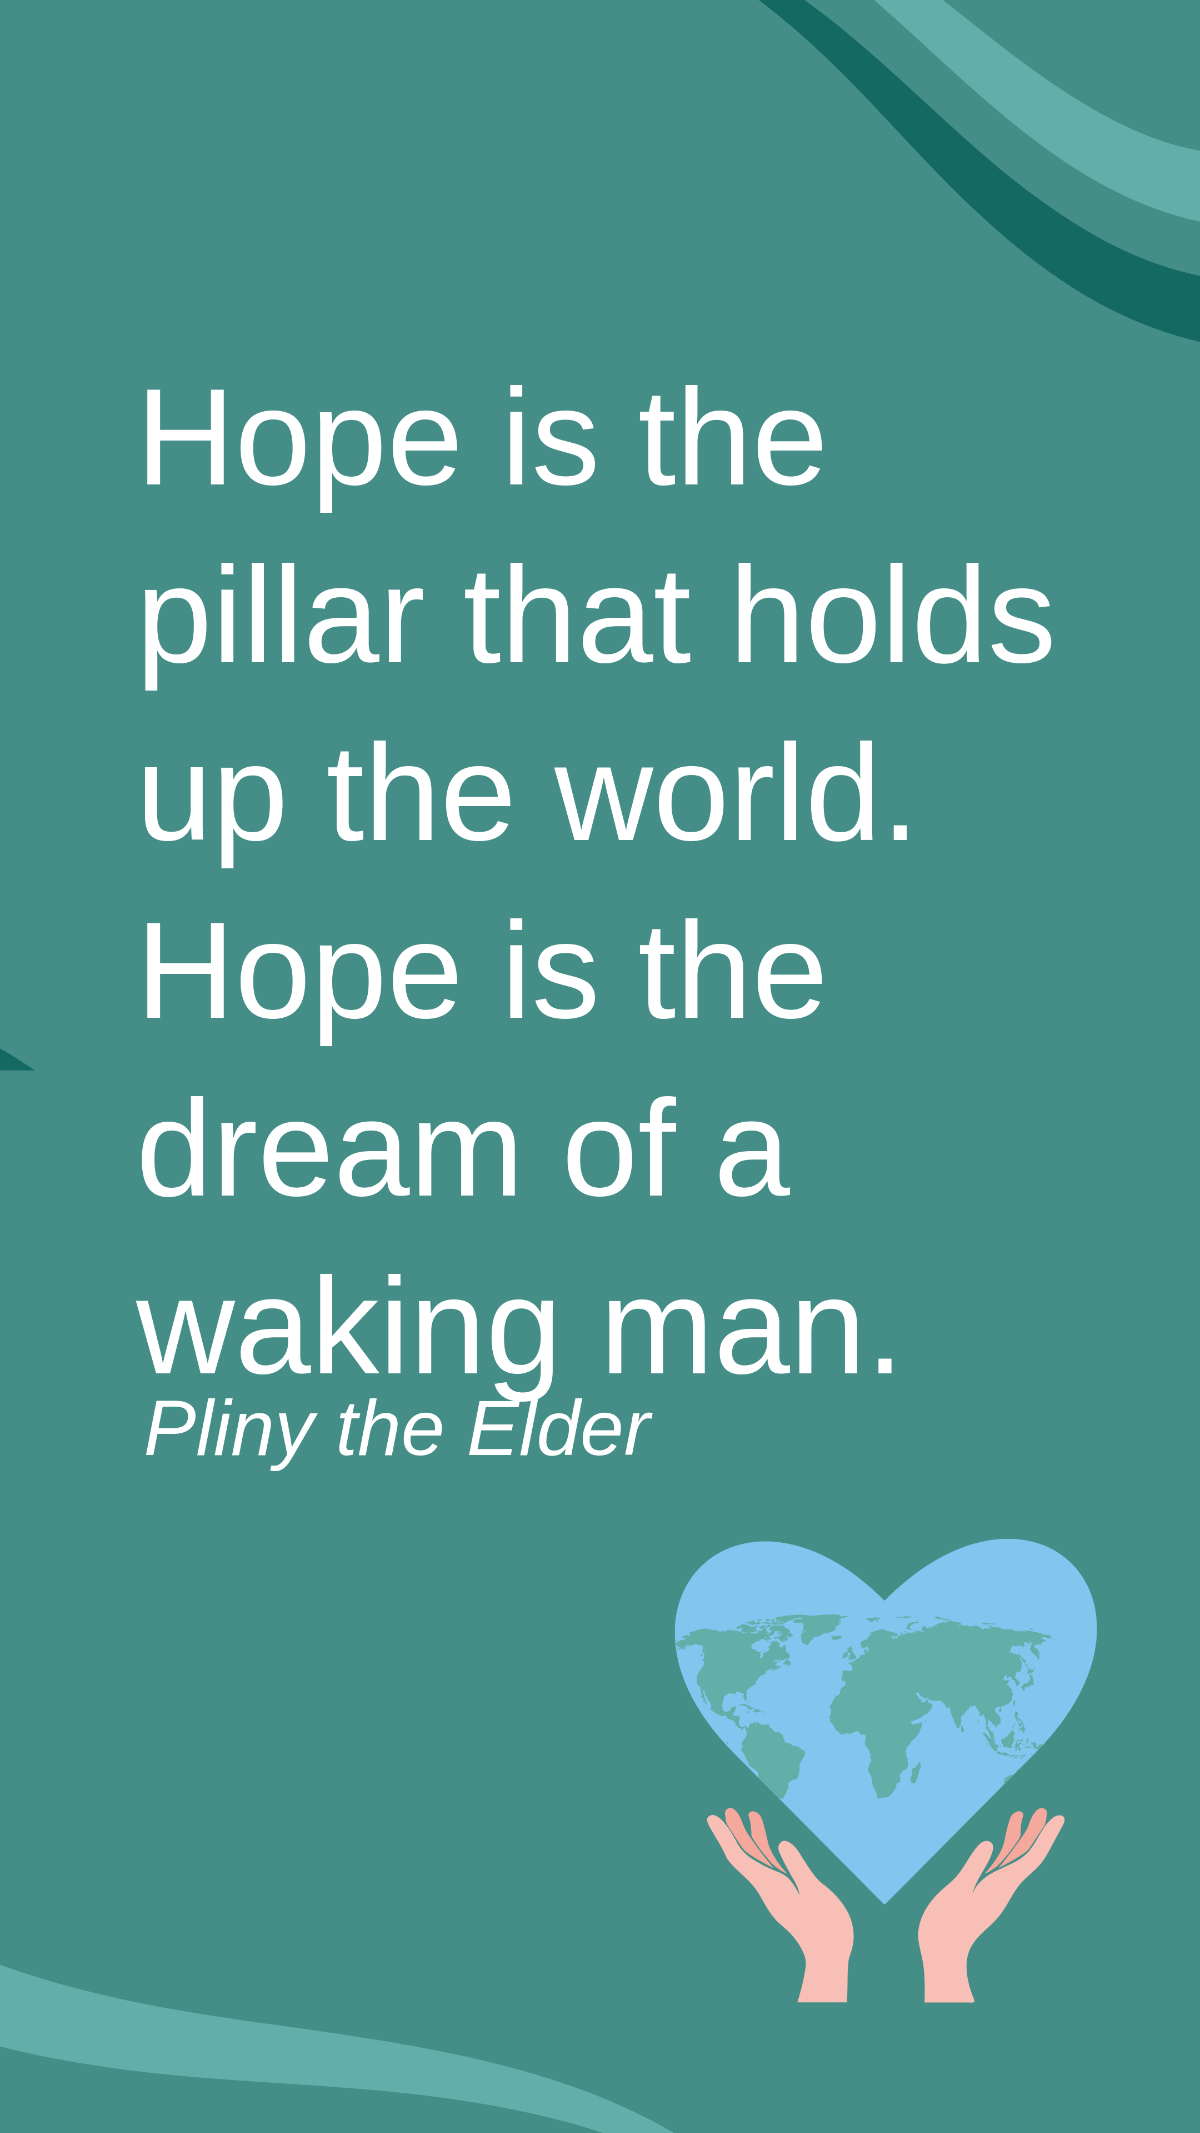 Pliny the Elder - Hope is the pillar that holds up the world. Hope is the dream of a waking man. Template